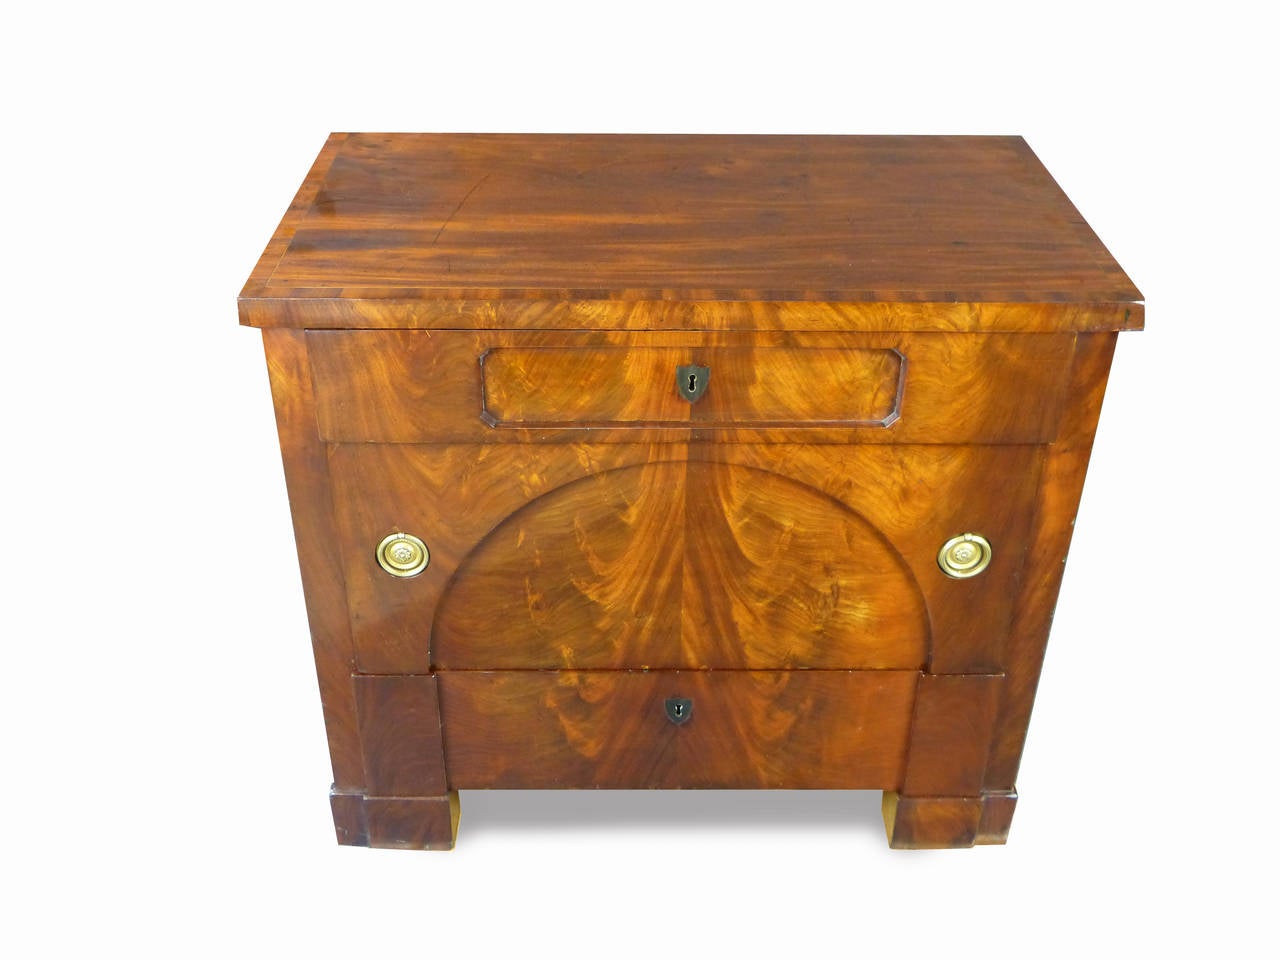 Exquisite small Biedermeier commode of Austrian origin with attractive figured mahogany on all four sides and banding on the upper surface, three graduated drawers the middle one being quite large with recessed ring pulls, the front with the